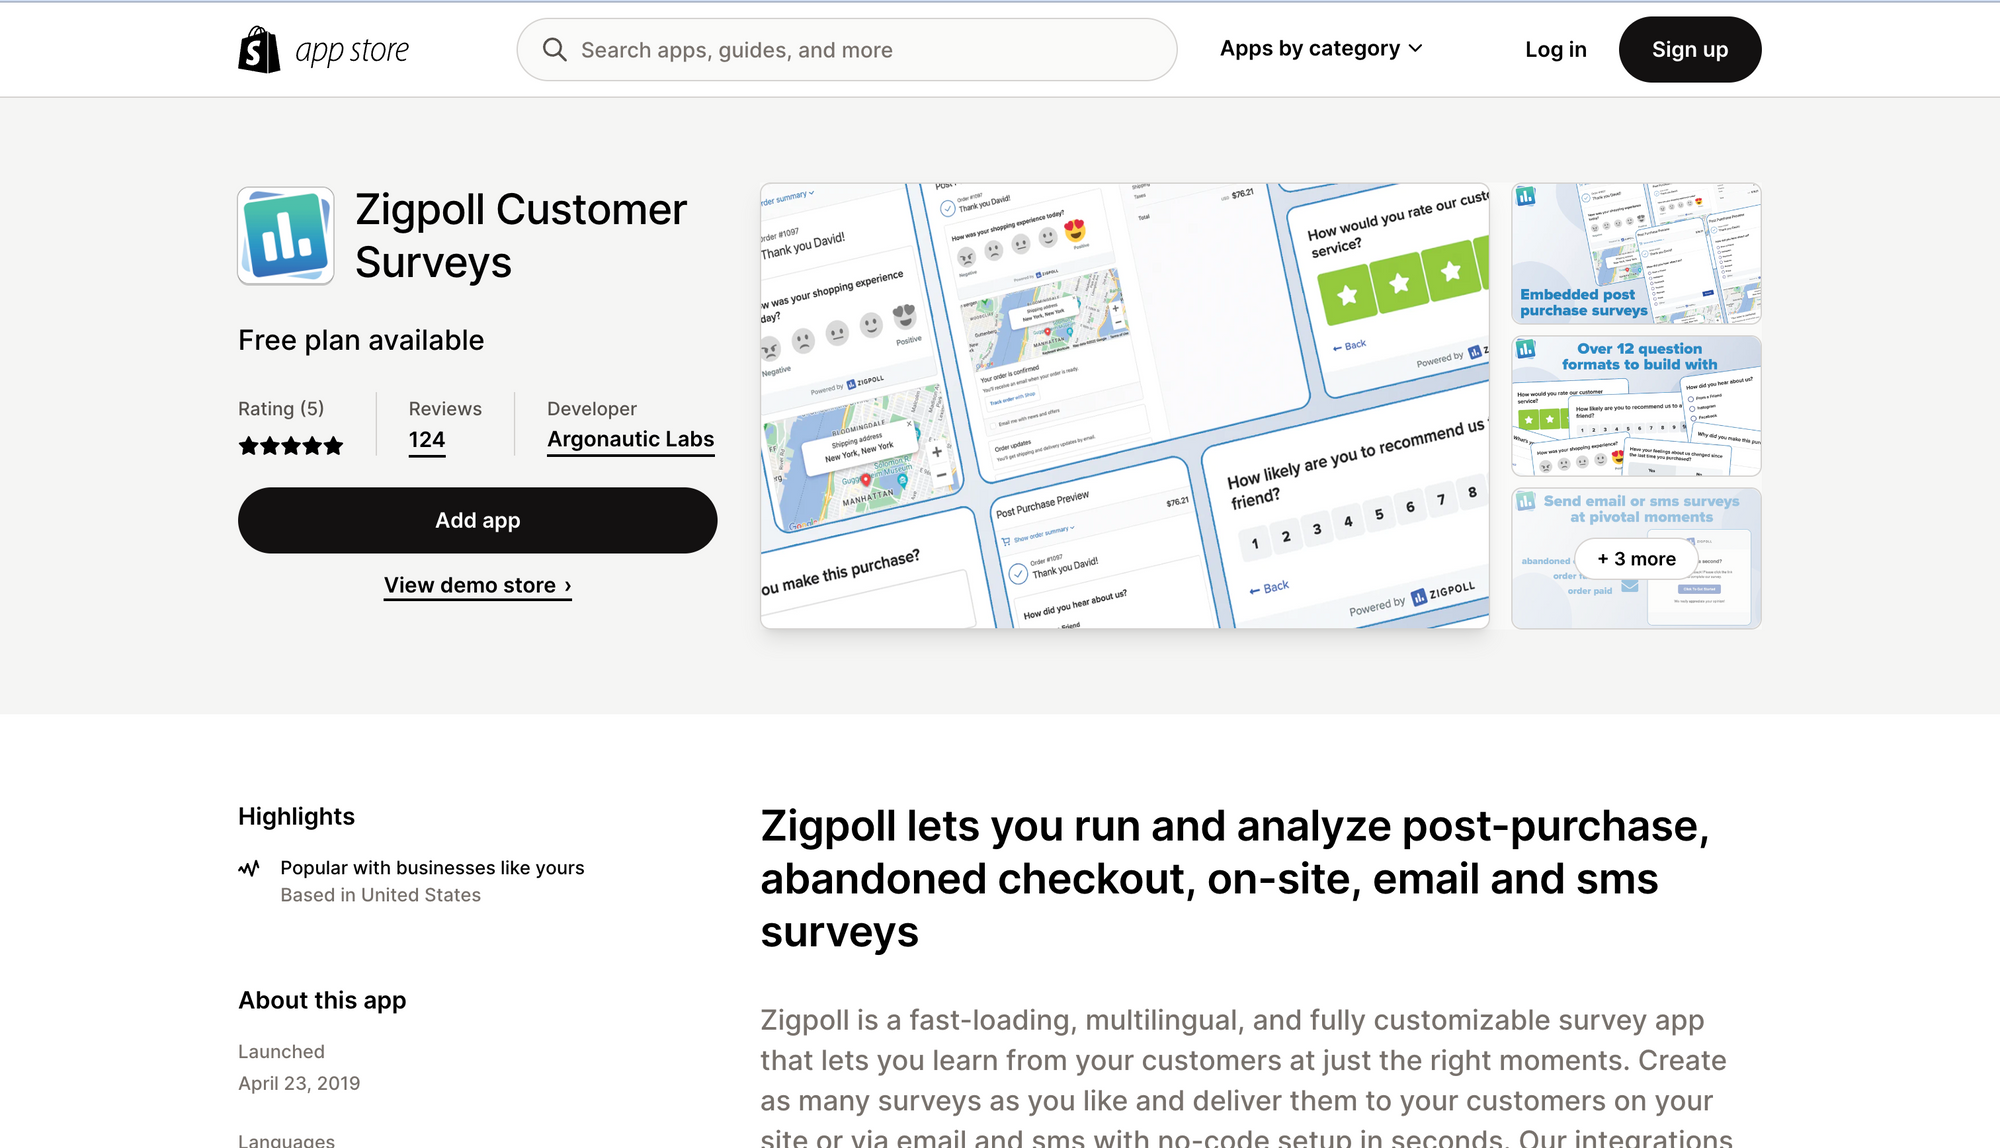 Image of the Zigpoll Customer Survey app on the Shopify app marketplace